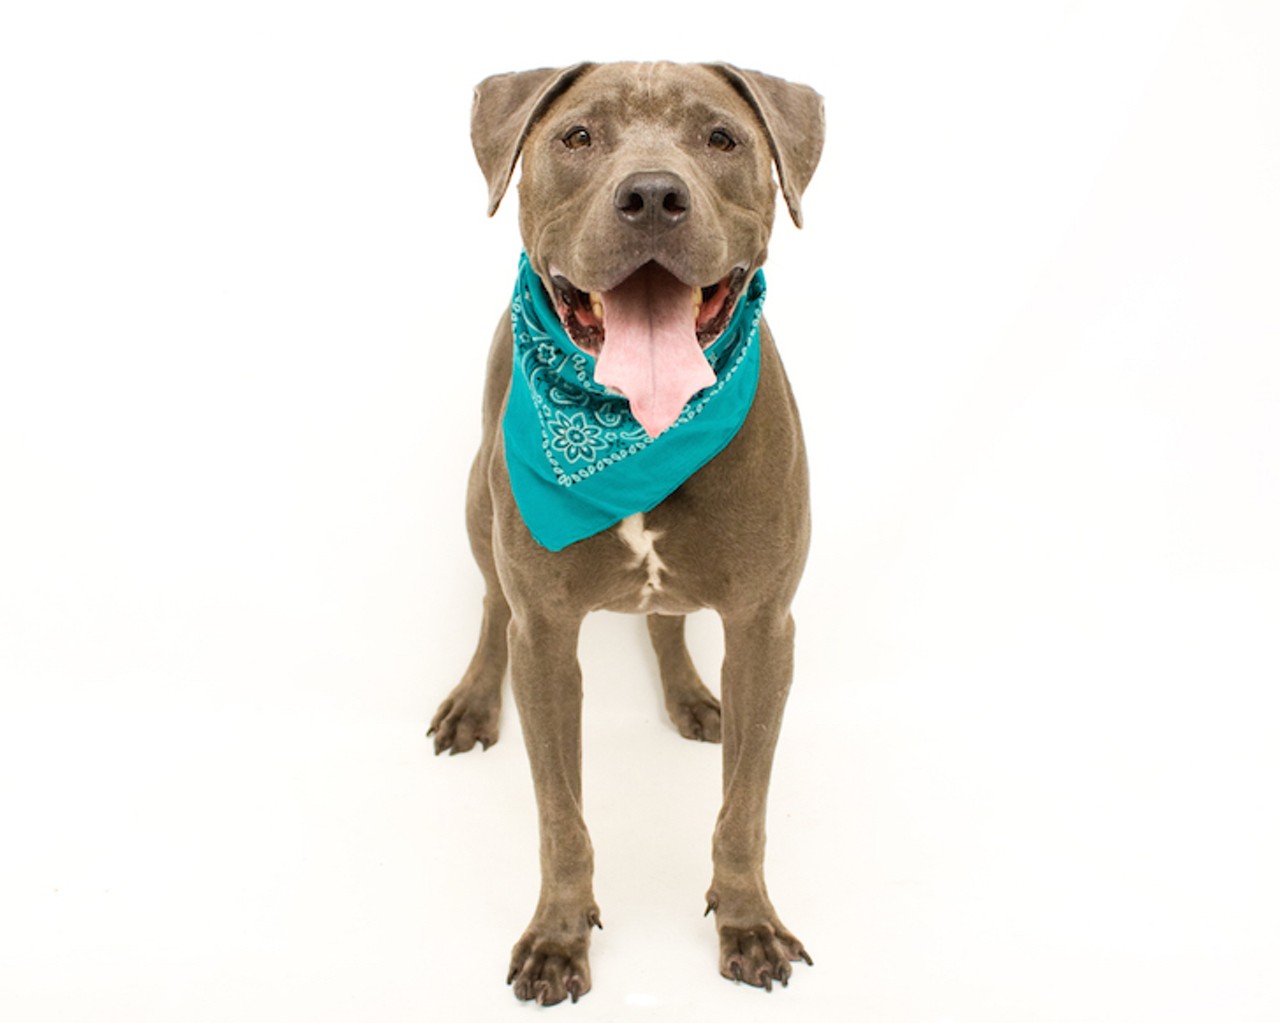 21 adoptable dogs ready to meet you at Orange County Animal Services